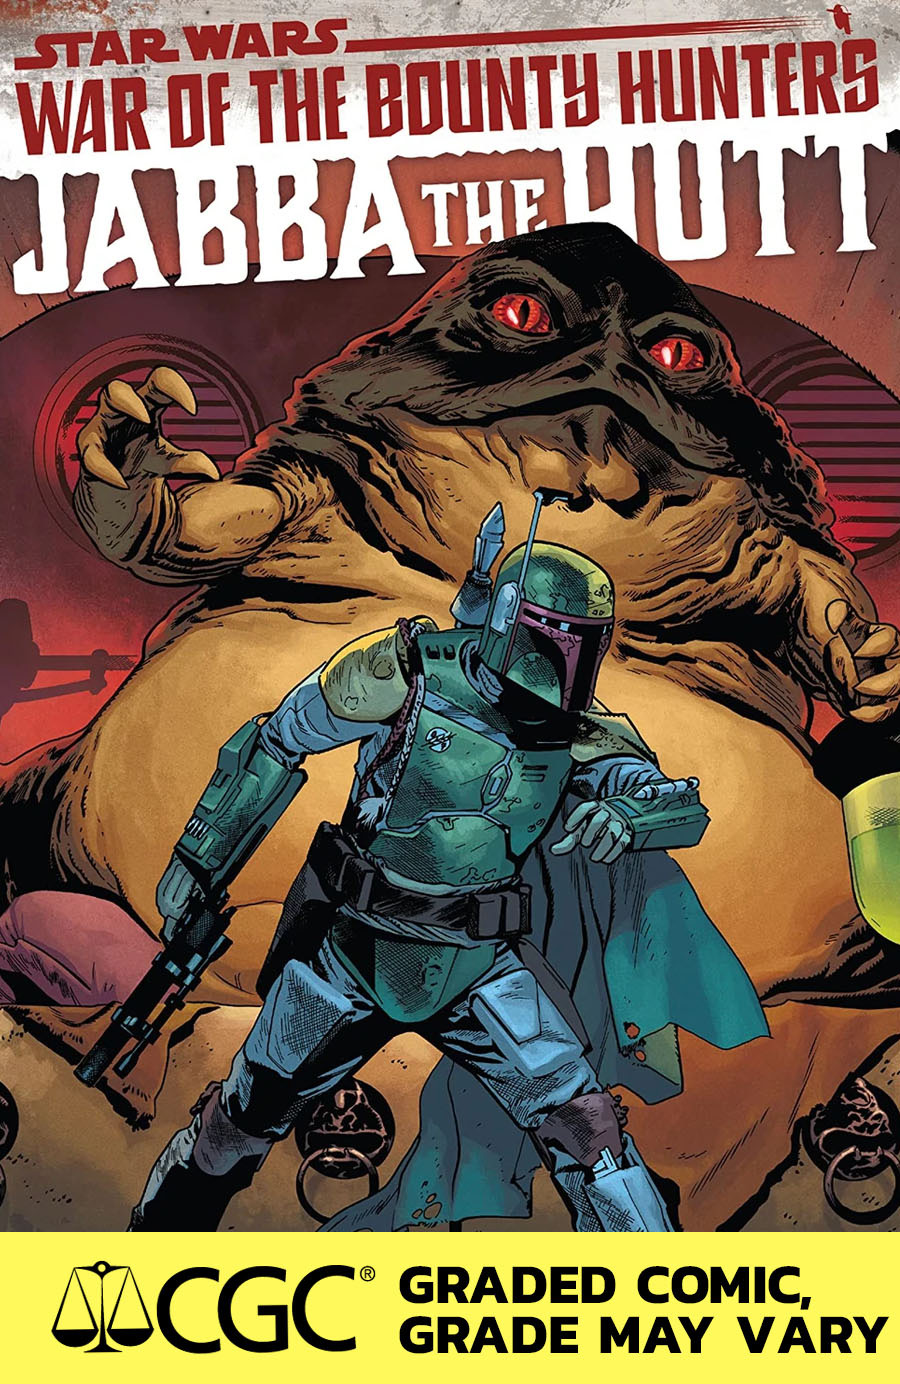 Star Wars War Of The Bounty Hunters Jabba The Hutt #1 (One Shot) Cover F DF CGC Graded 9.6 Or Higher